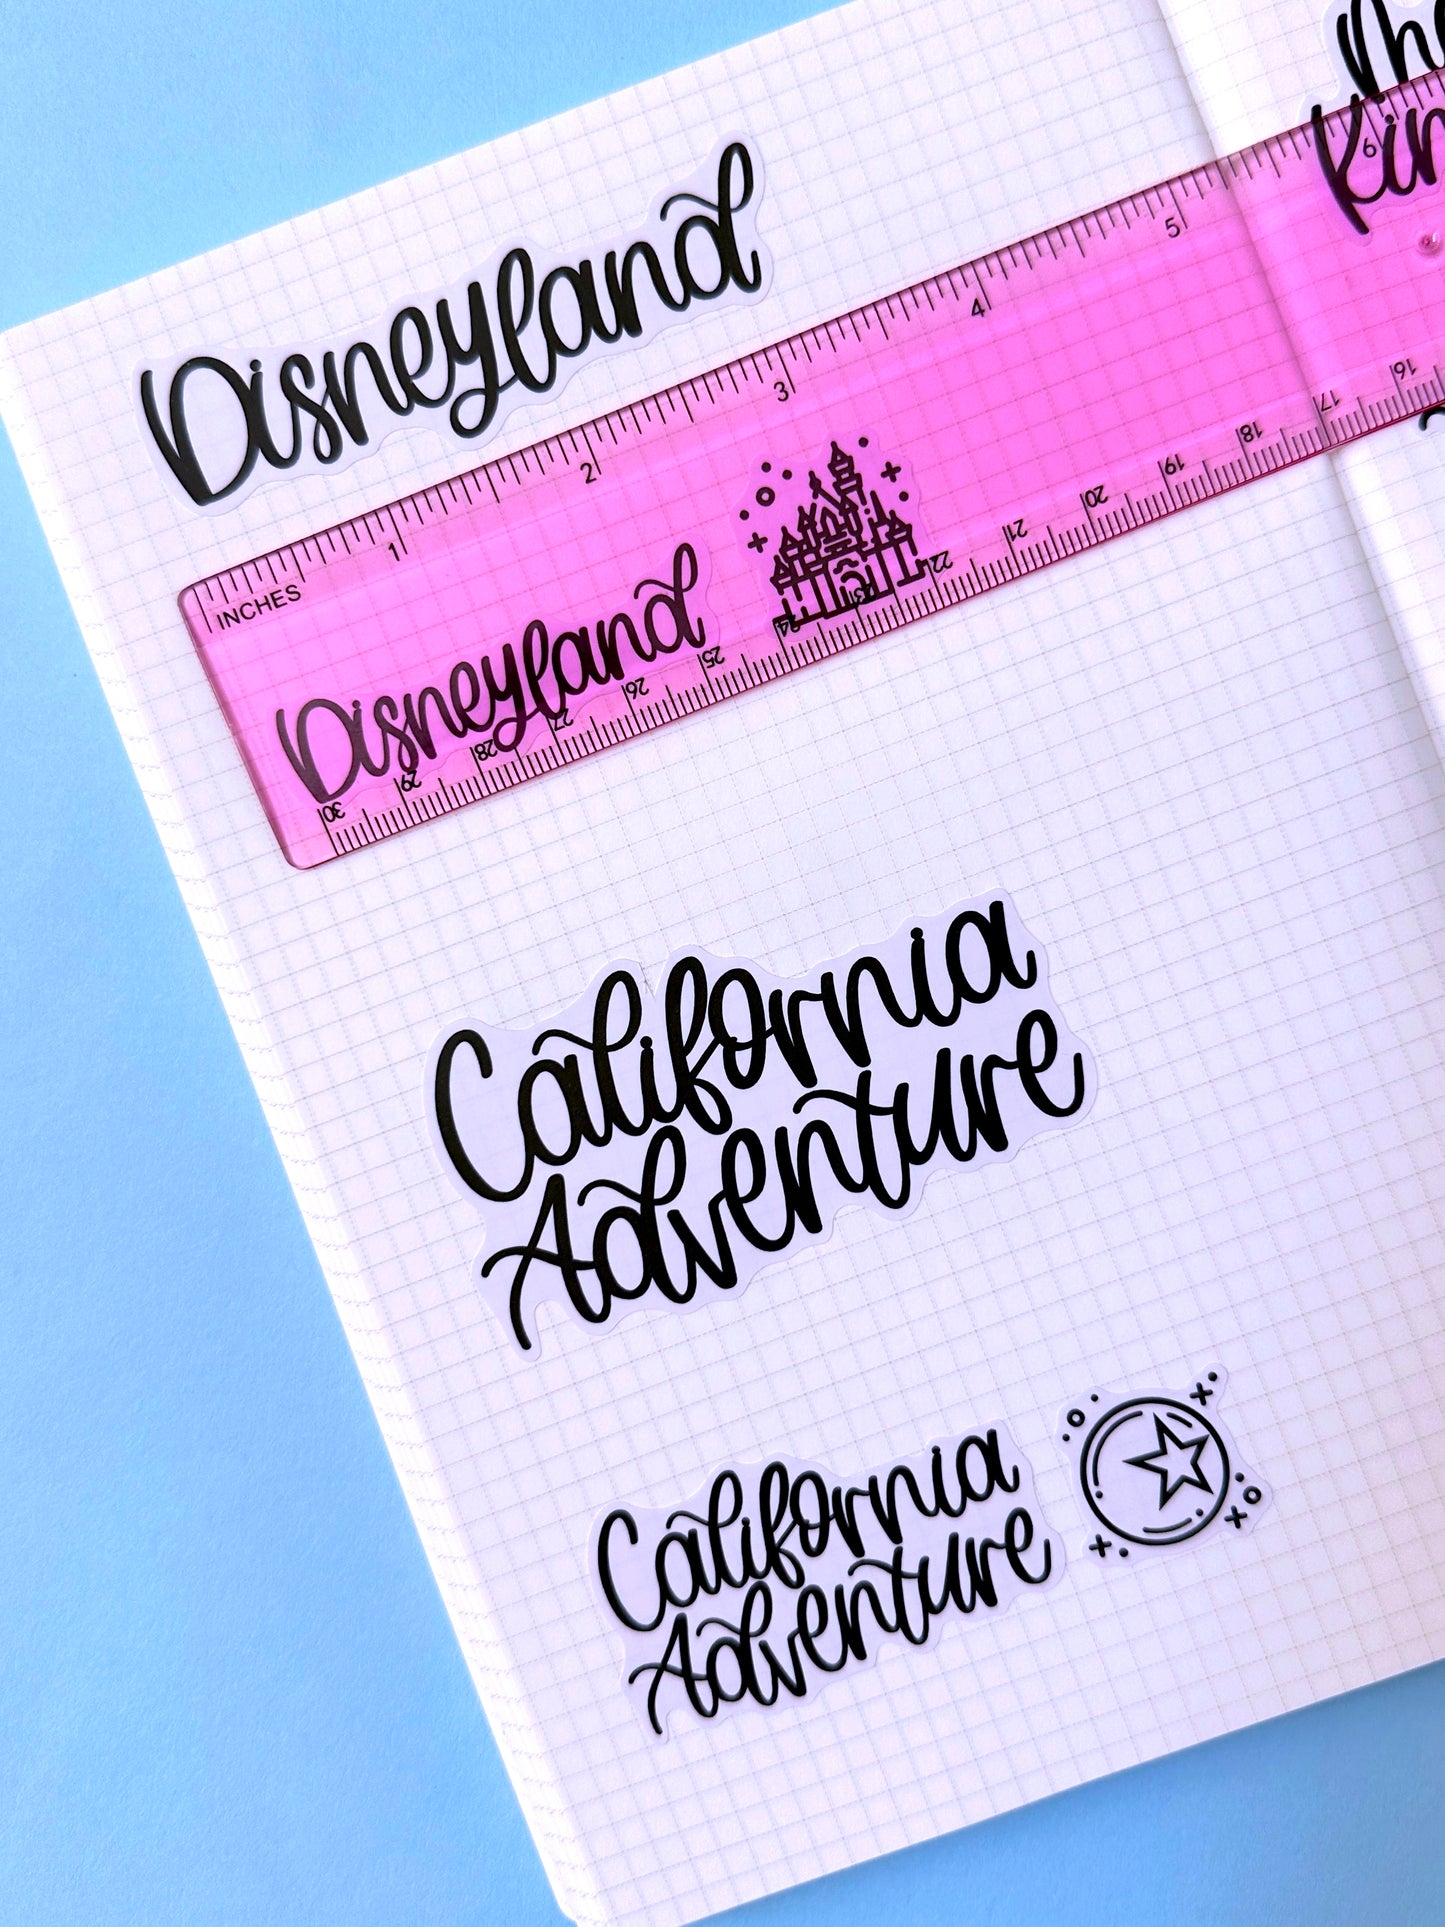 Journaling PAPER Stickers - Handlettered Park Days (WEST COAST)